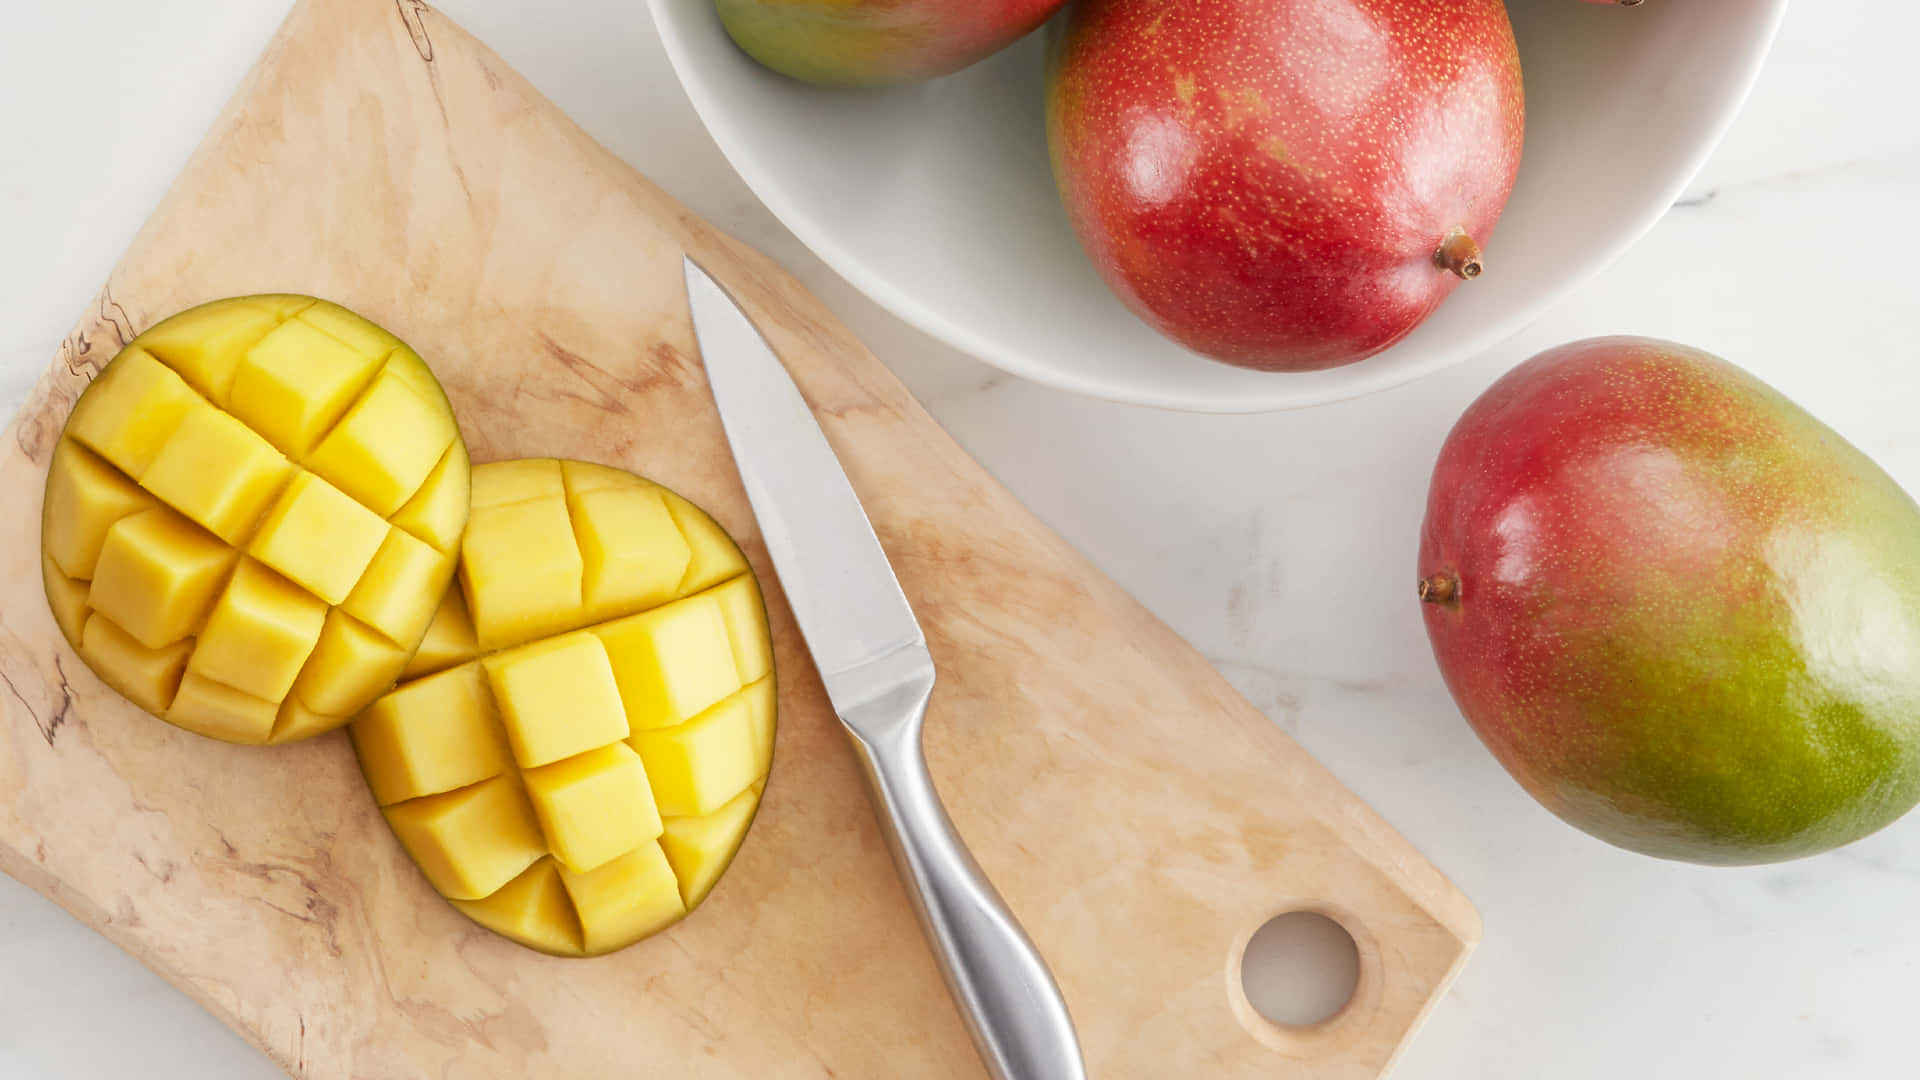 Unpack the Summer with Juicy Mangoes